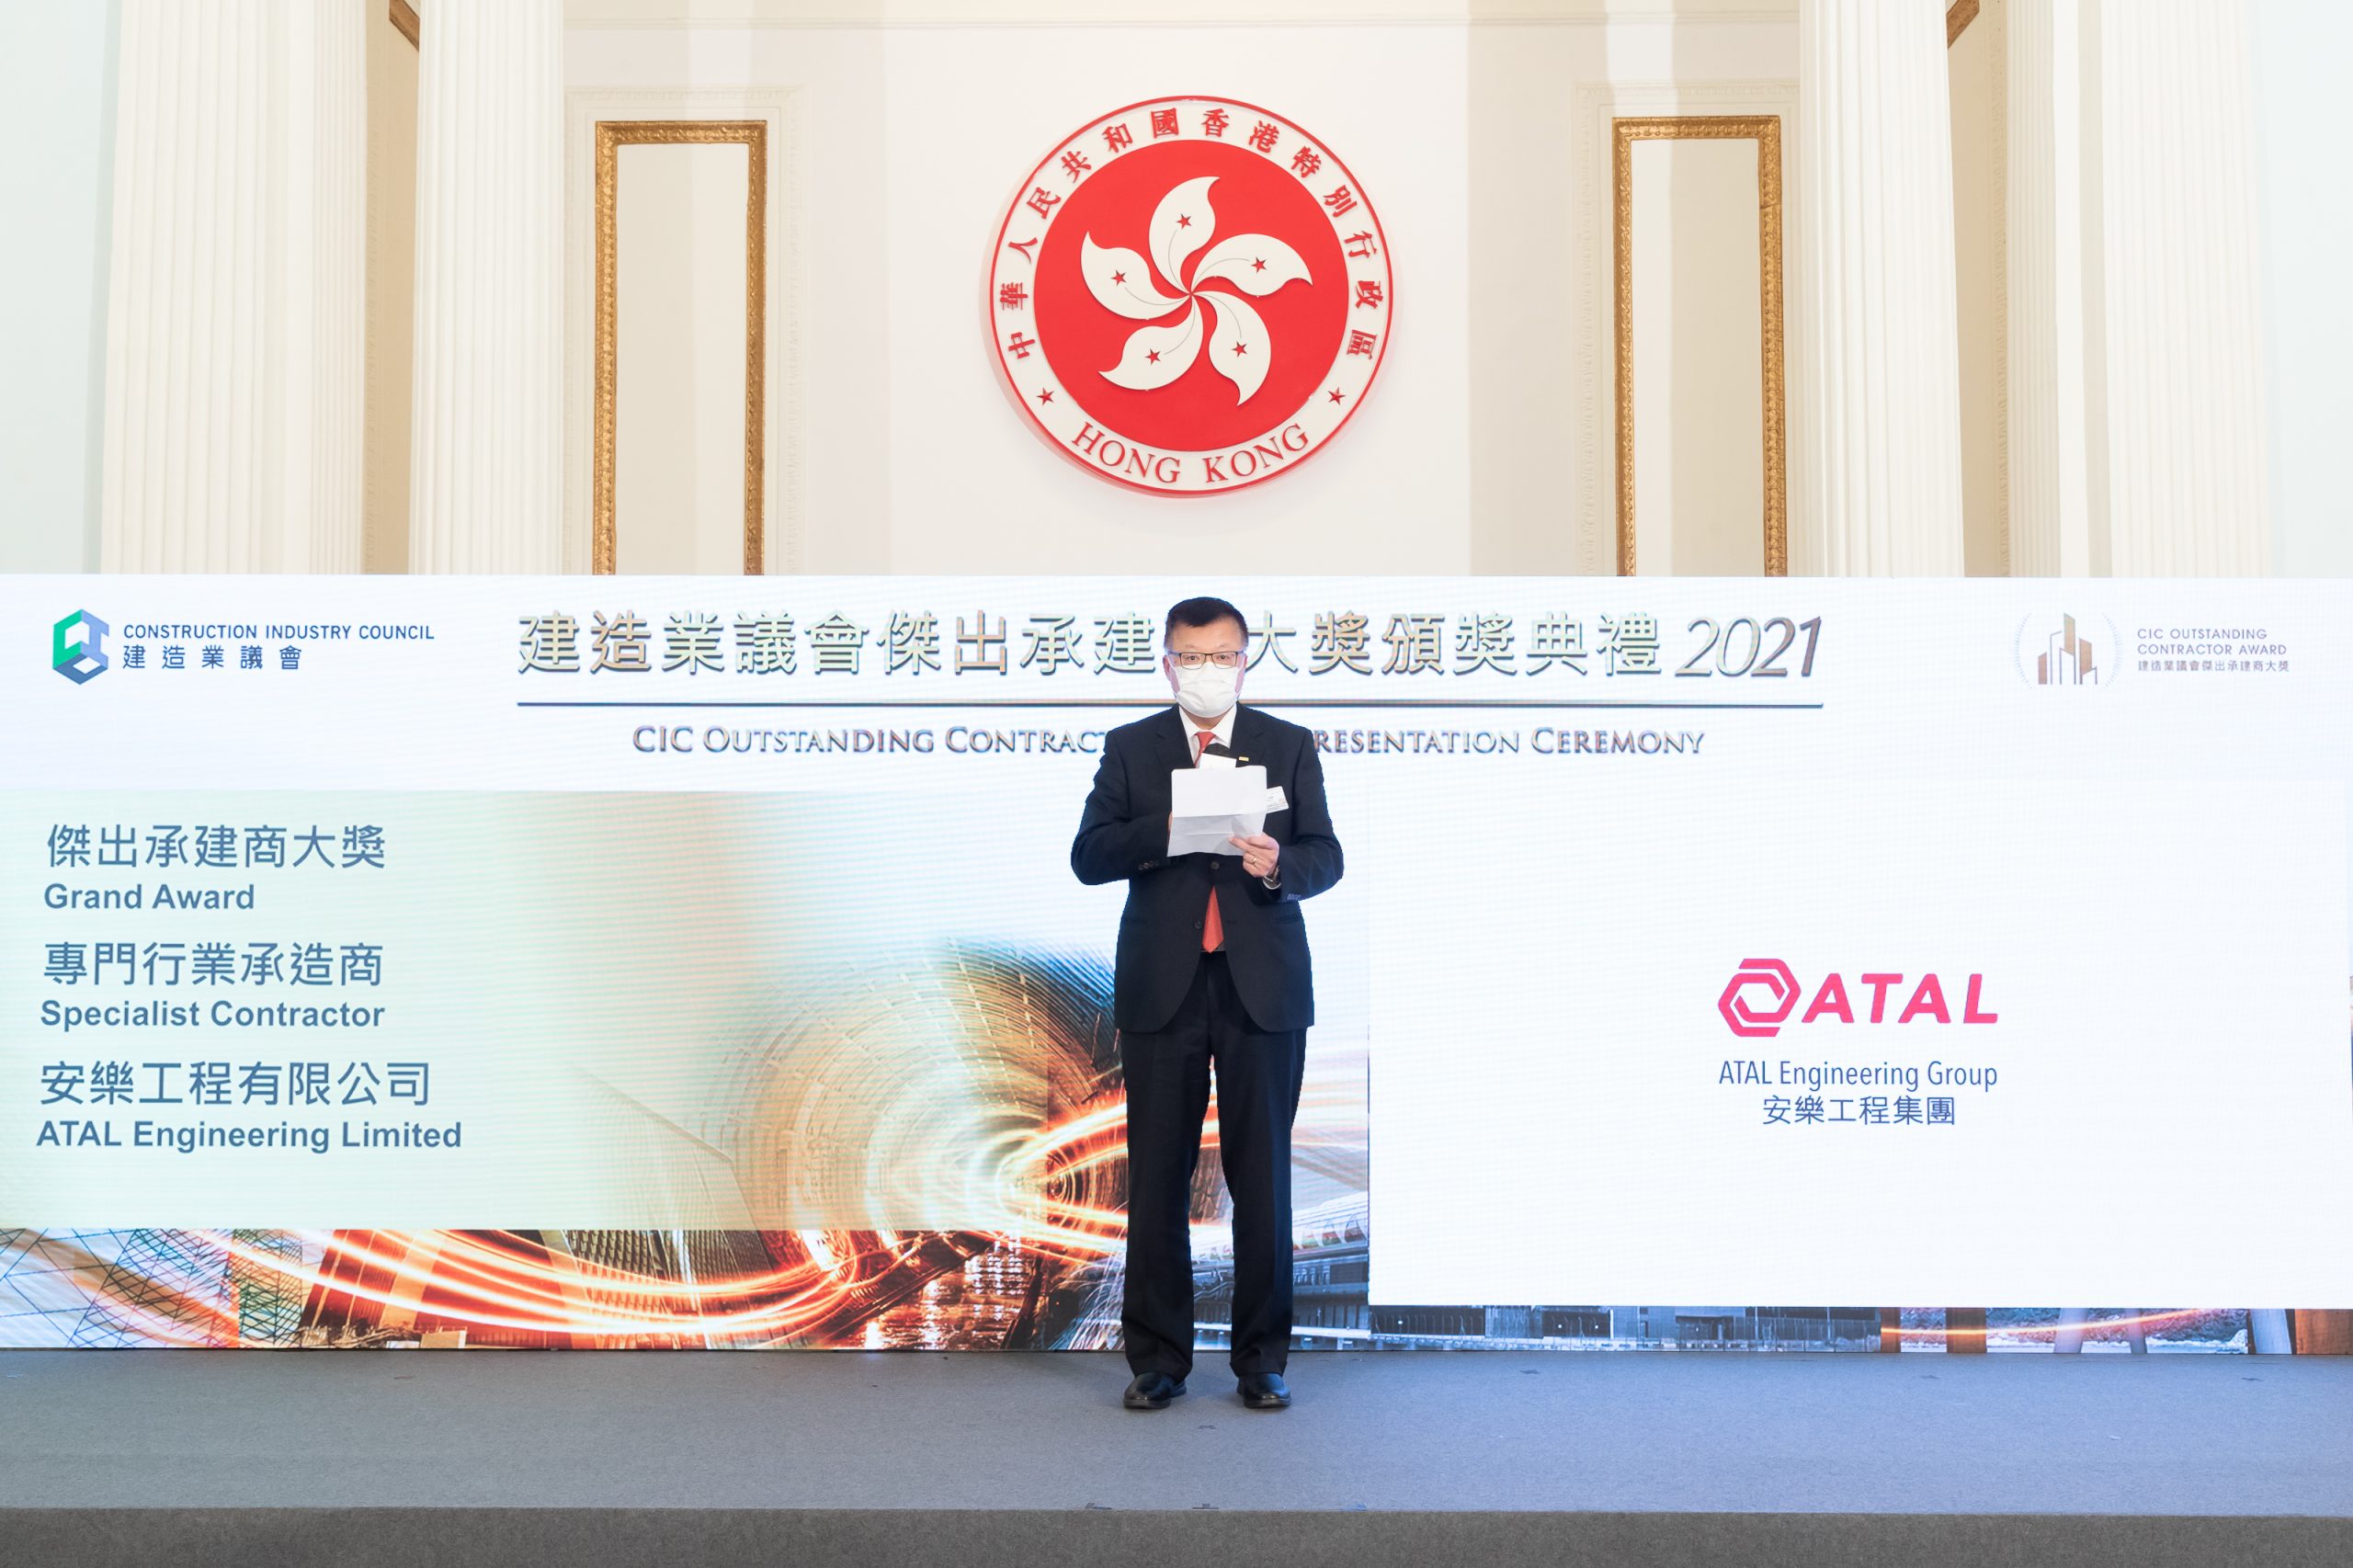 Mr Victor Law, Managing Director of ATAL, shares his award acceptance speech on stage at the award presentation ceremony